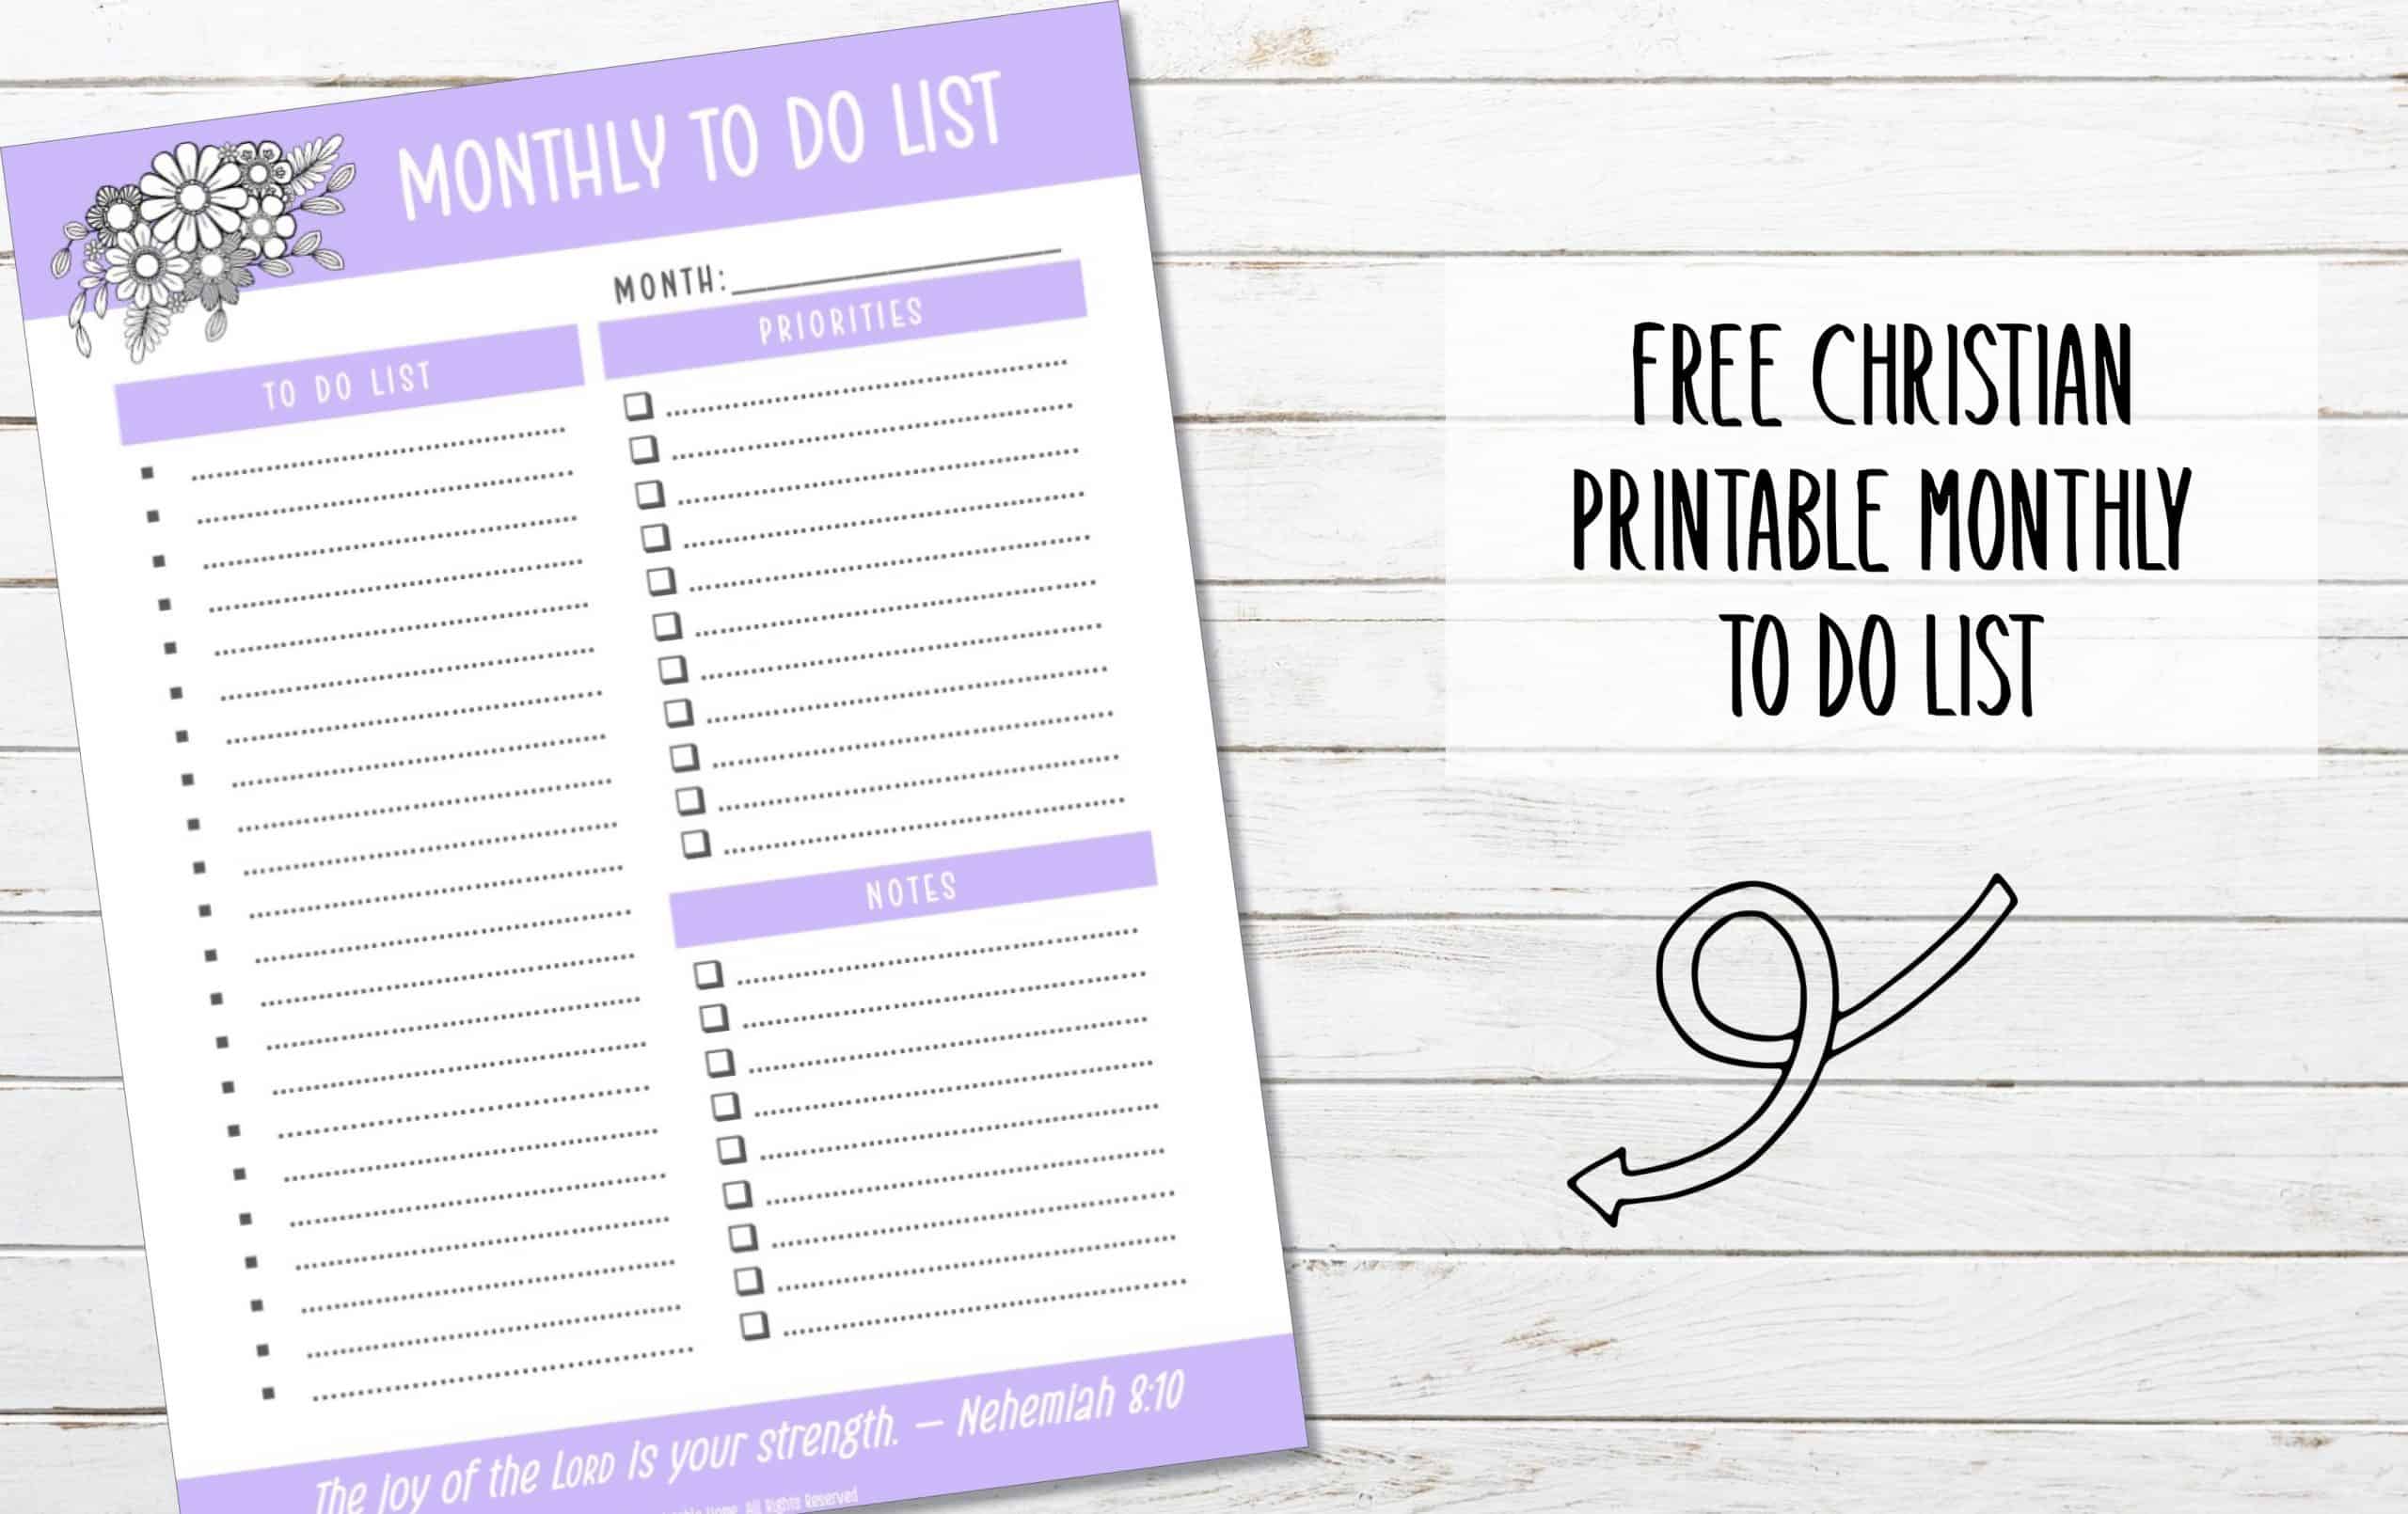 FREE Printable Christian Monthly To Do List